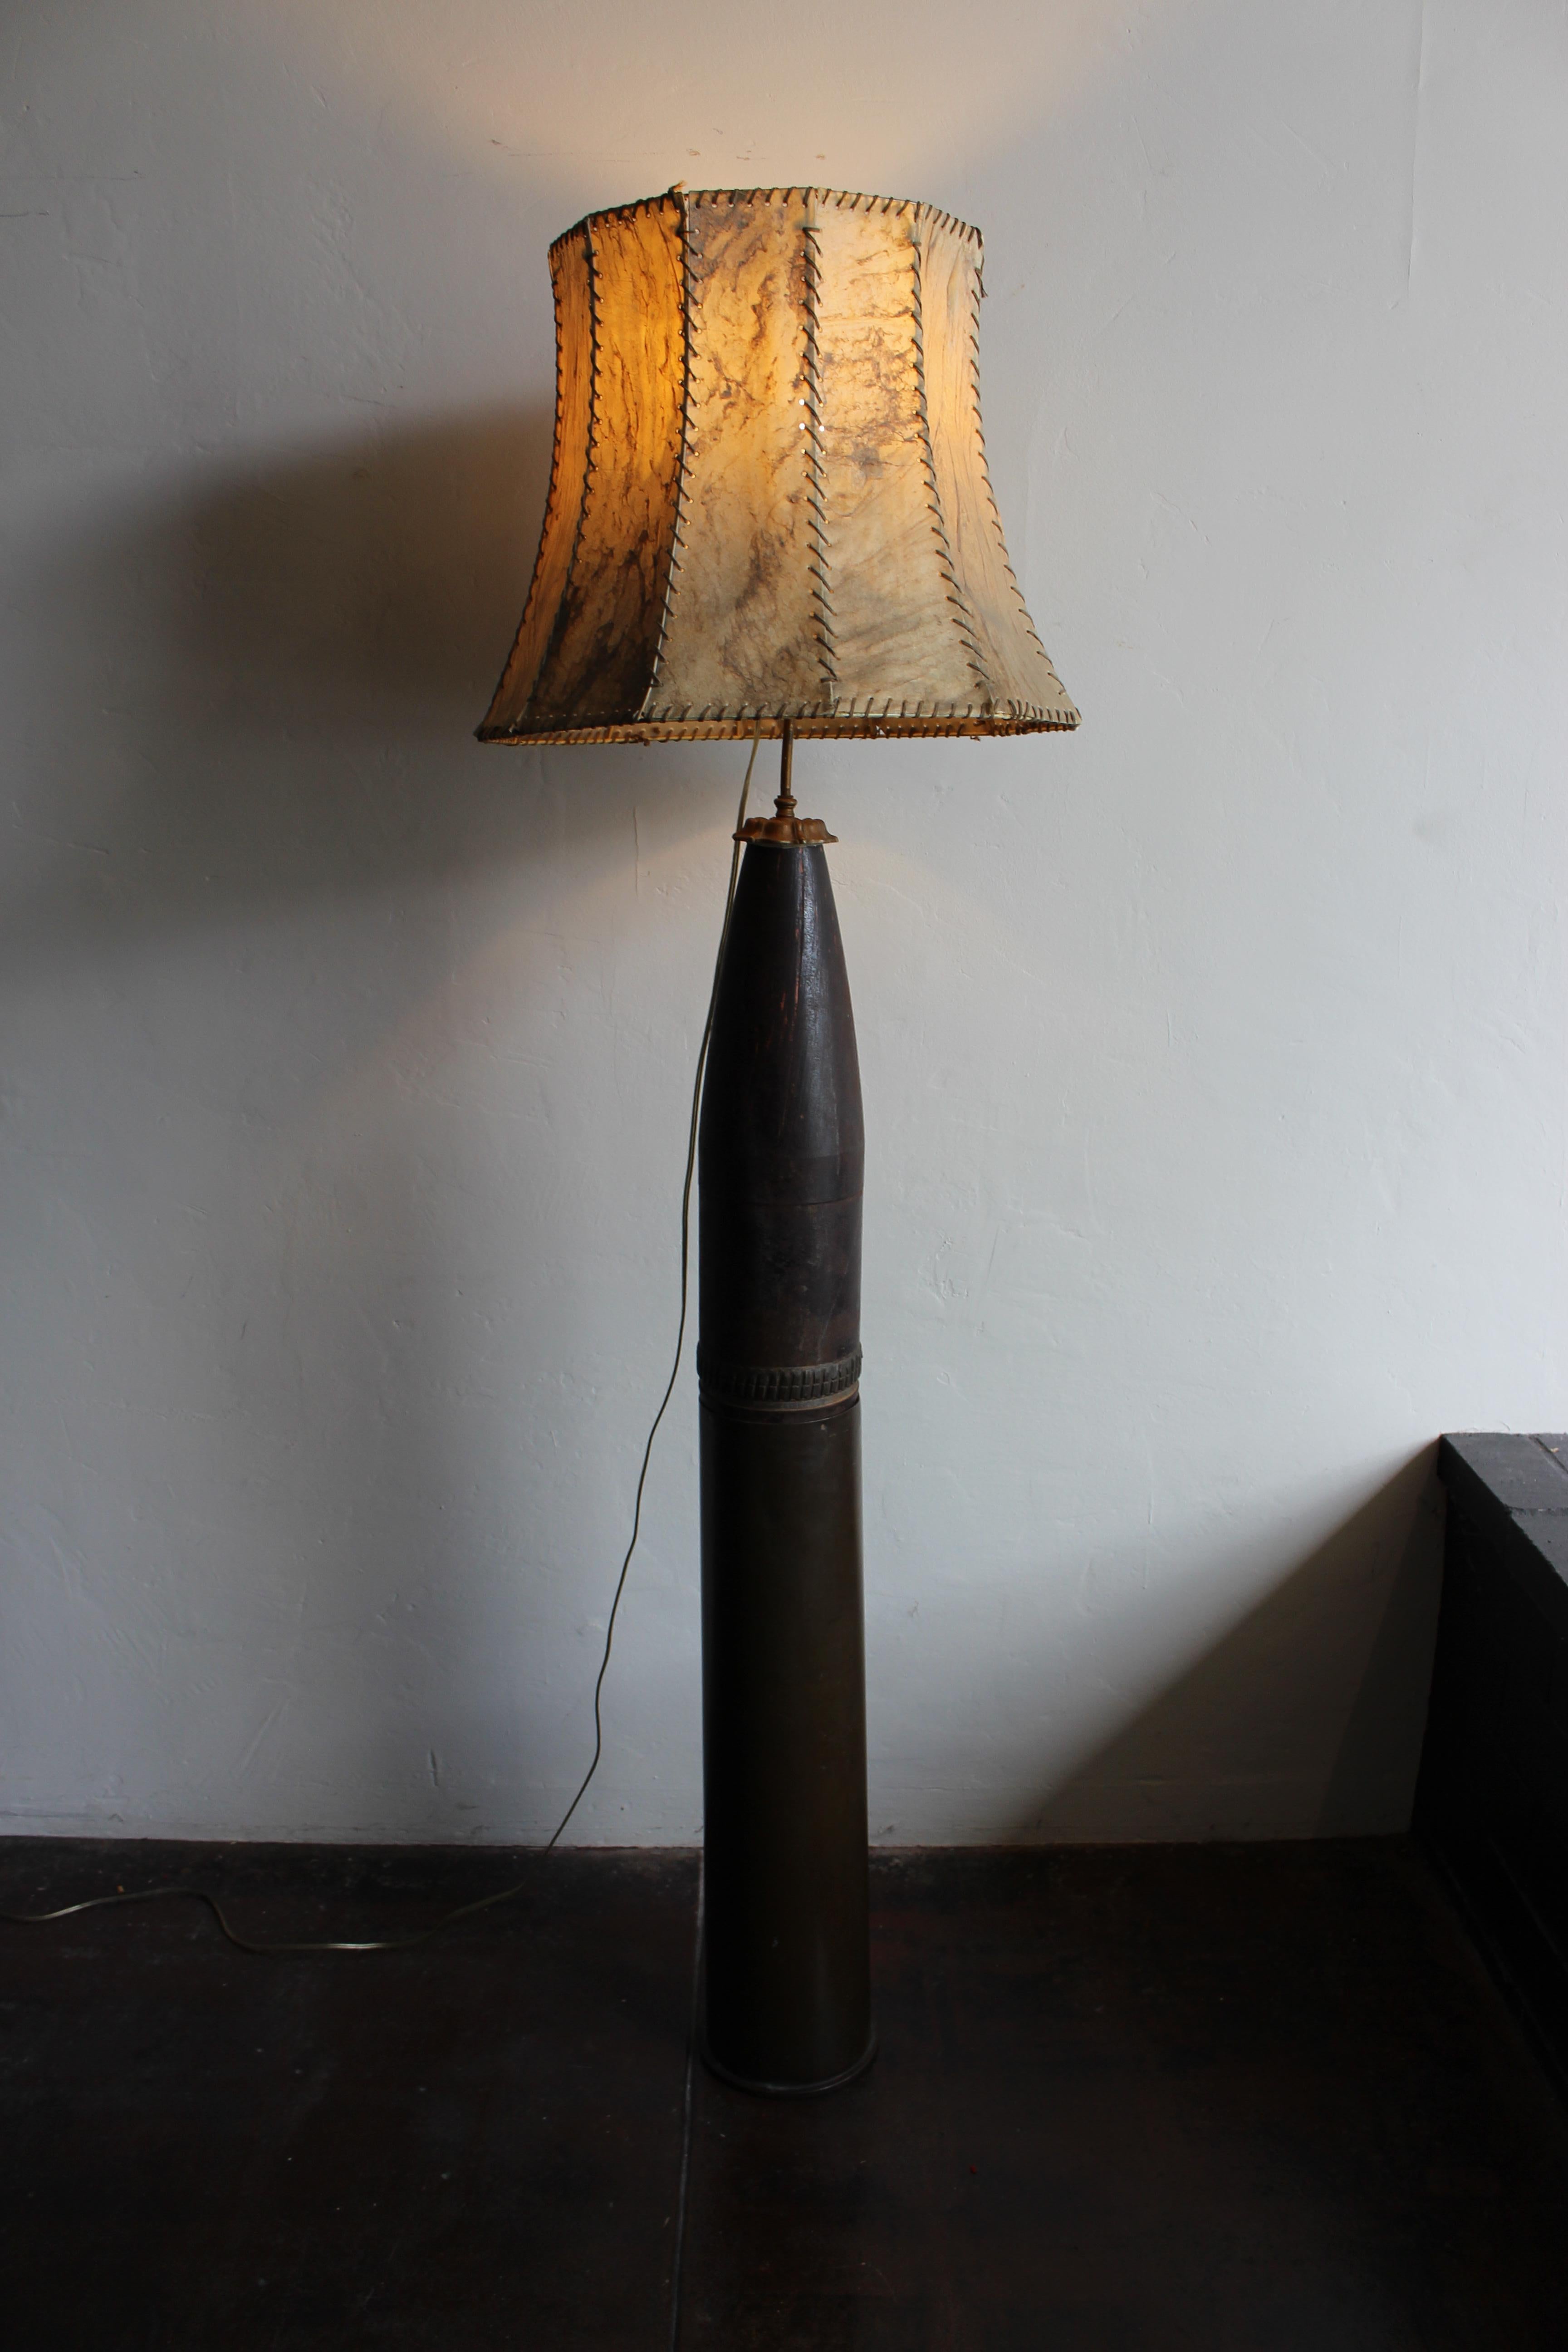 1918 Mortar Shell converted in to the floor lamp .Brass base and metal,probably from the World War I period .
Leather parchment lamp shade from the period .Bottom part is all brass .
Shipping US continental in home delivery $ 500